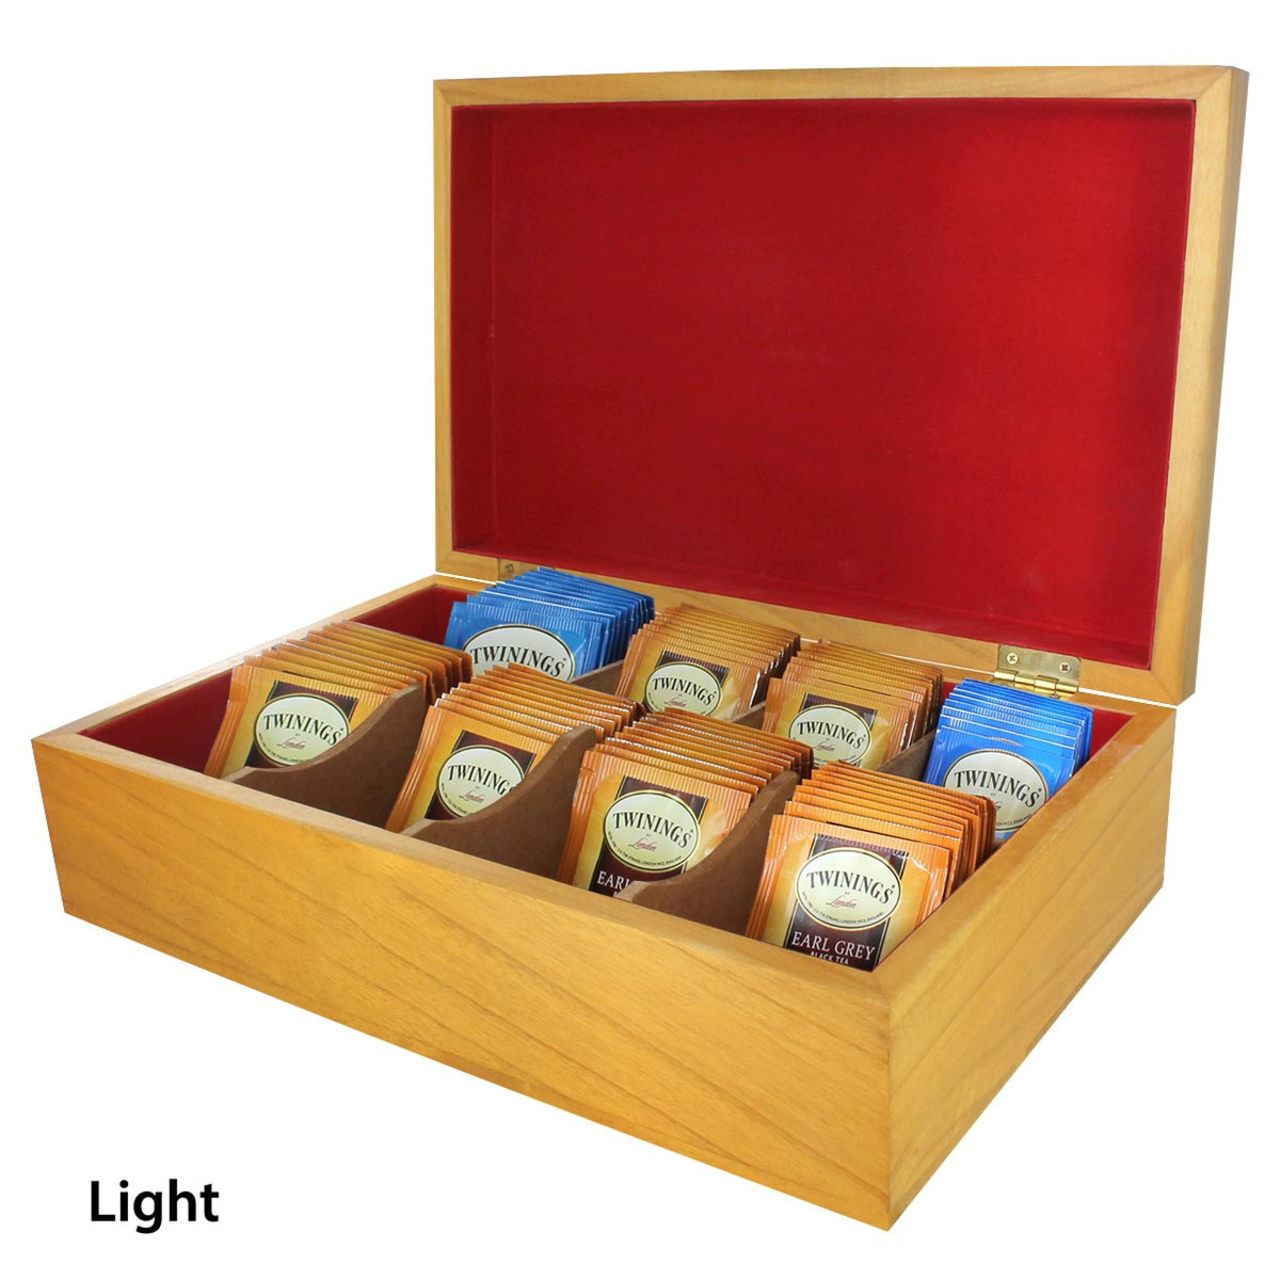 Tea Chests with Tea - Twinings' Earl Grey Selections Light (US Made)